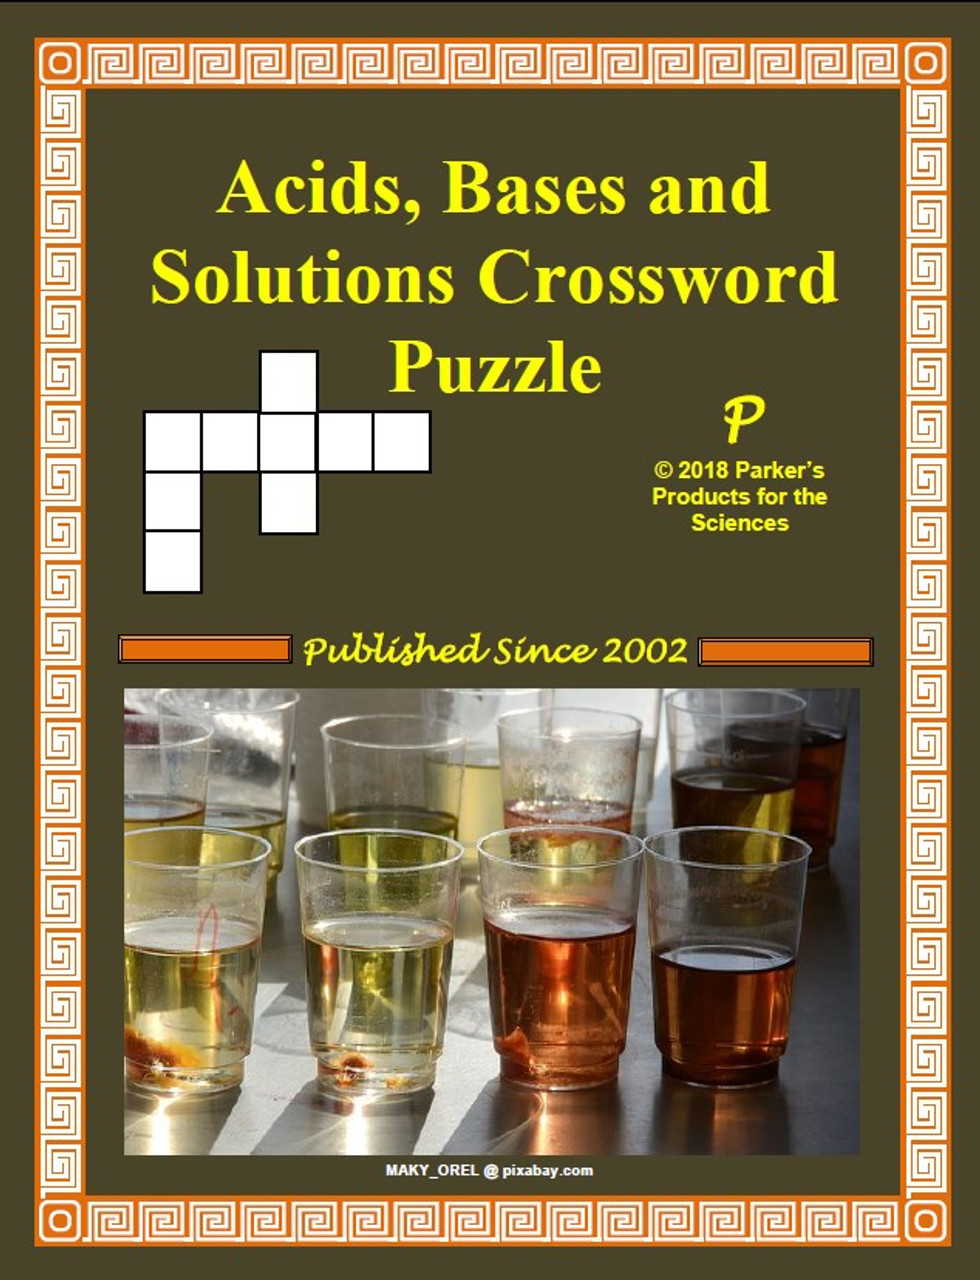 Acids, Bases, and Solutions Crossword Puzzle